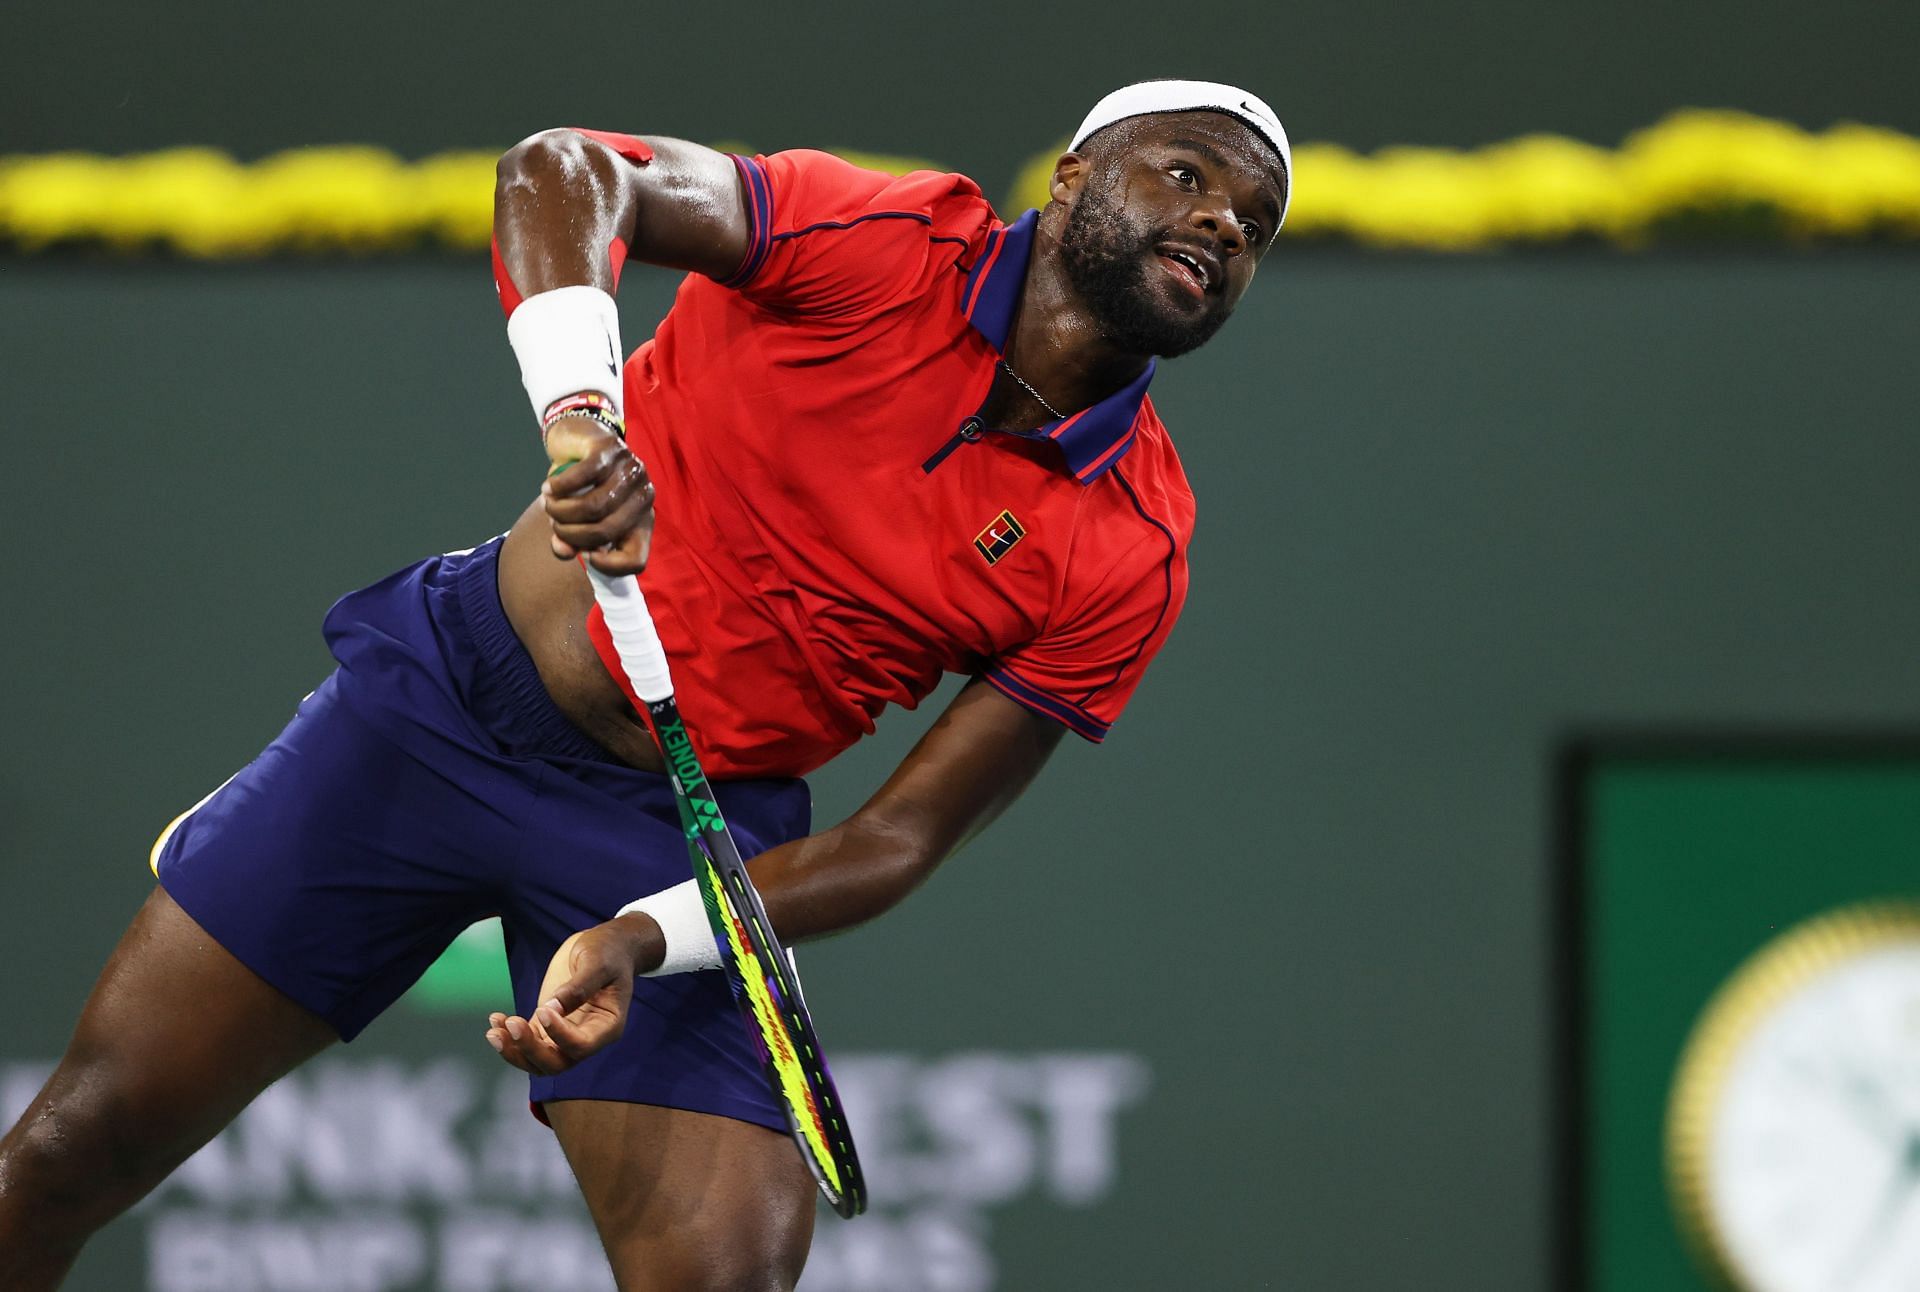 Frances Tiafoe in action at the BNP Paribas Open